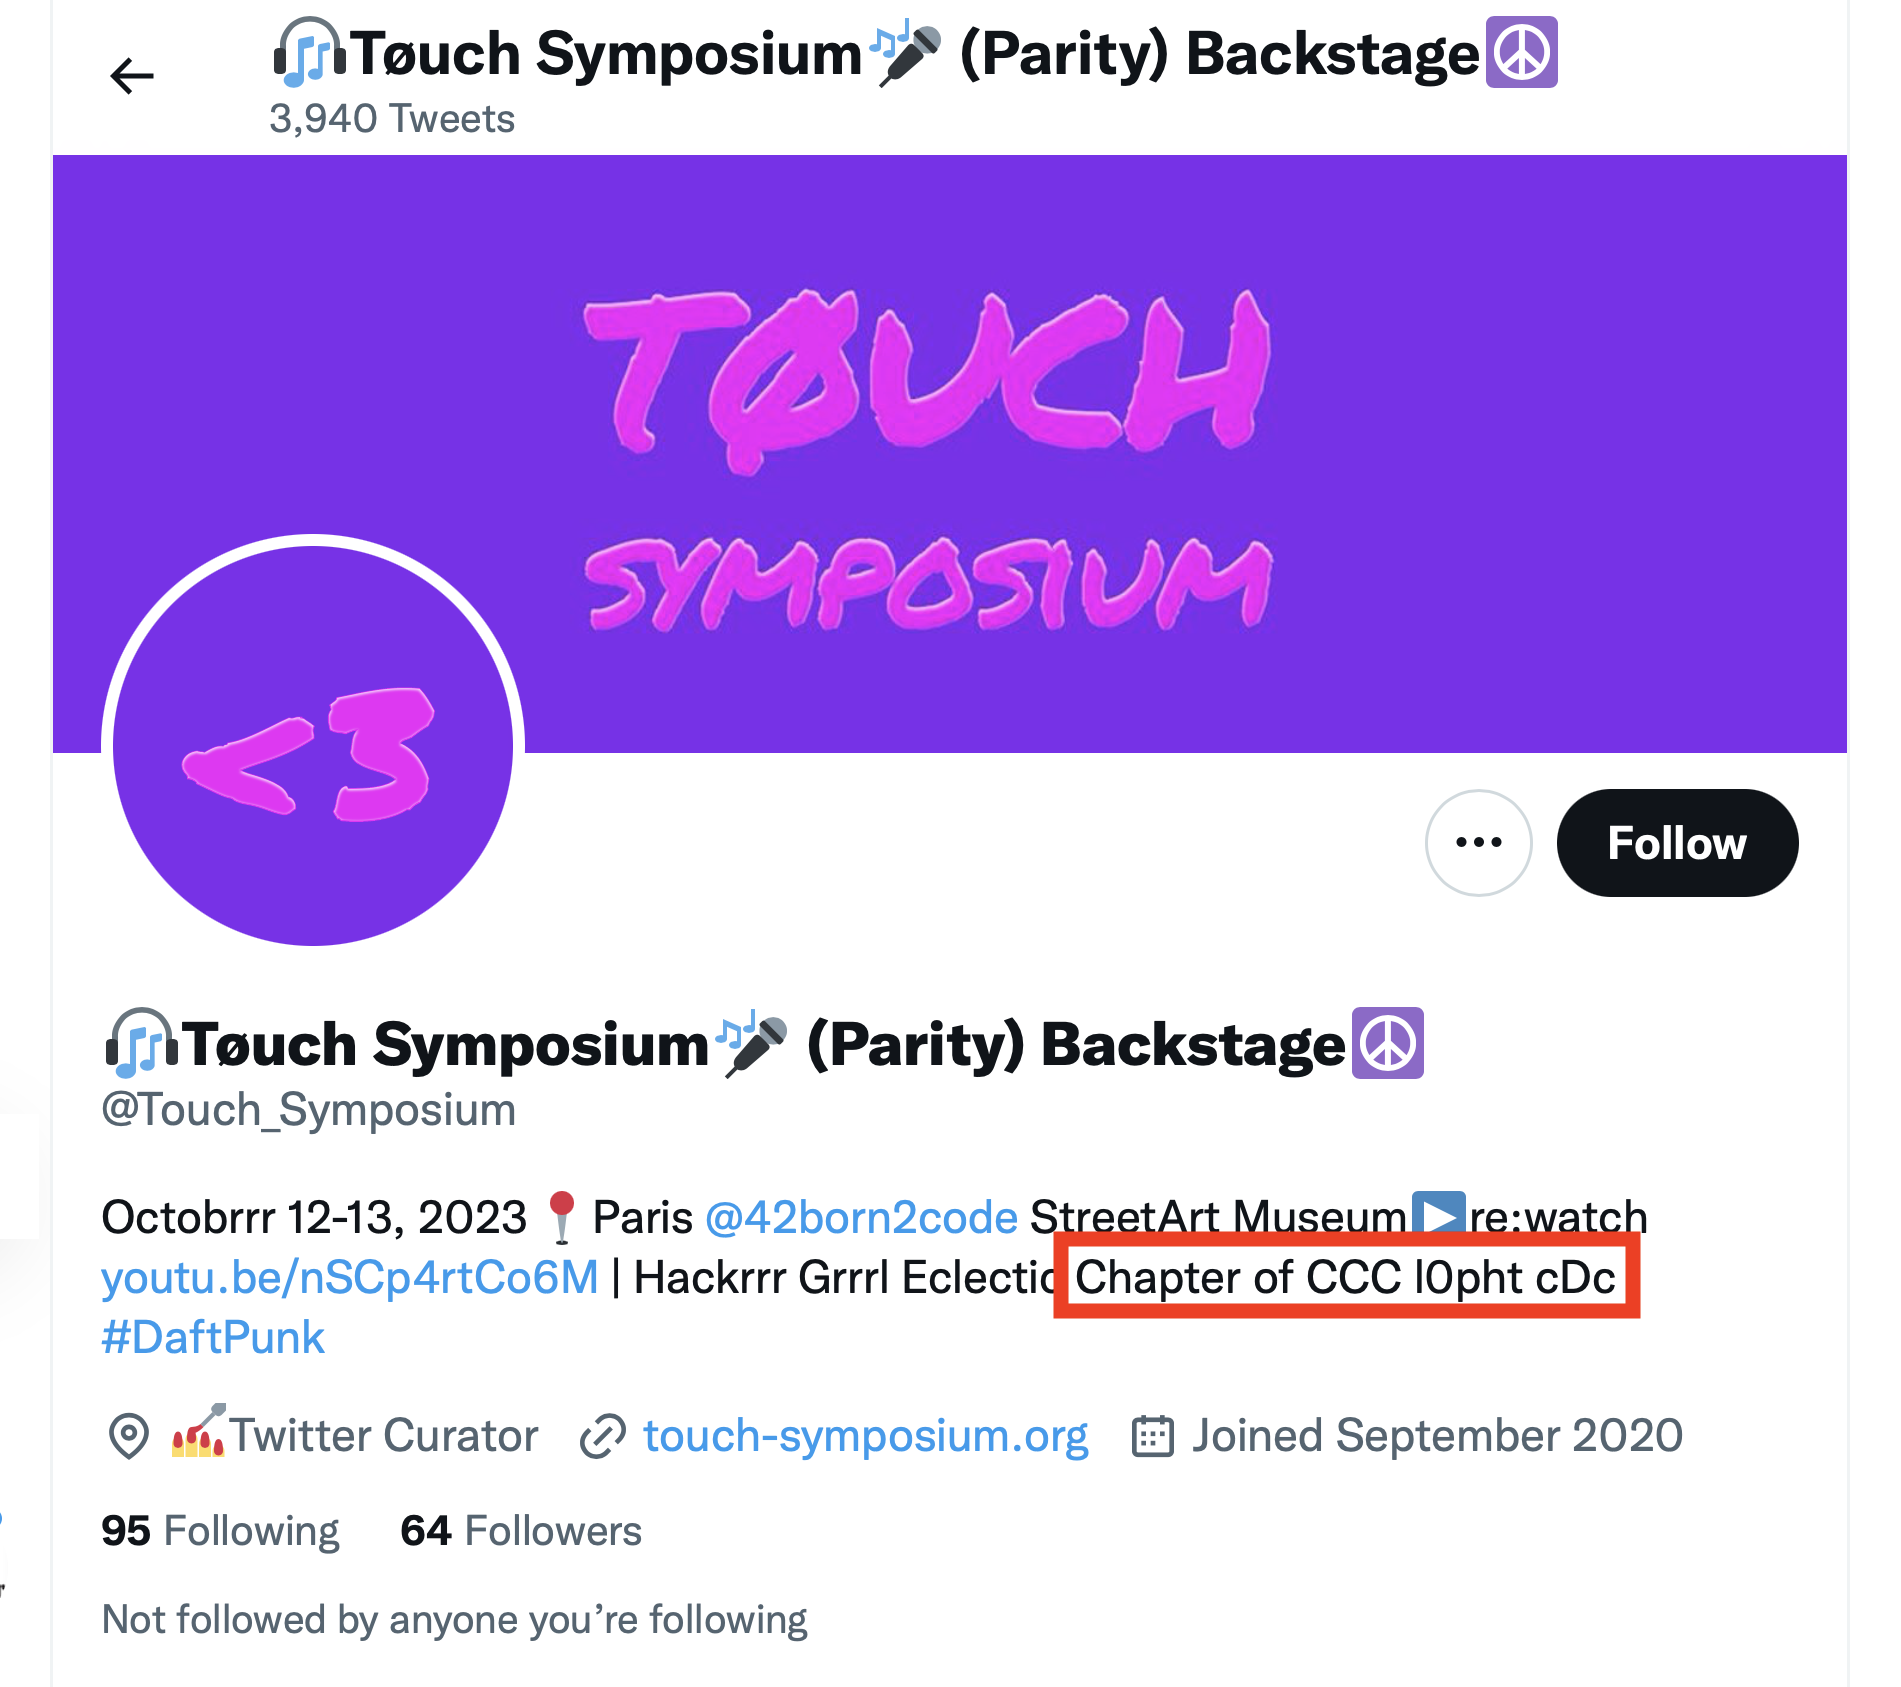 The 16 November 2022 version of the @Touch_Symposium twitter bio. The bio includes the text 'Hackrrr Grrrl Eclectic Chapter of CCC l0pht cDc', with a red box for emphasis surrounding 'Chapter of CCC l0pht cDc'.